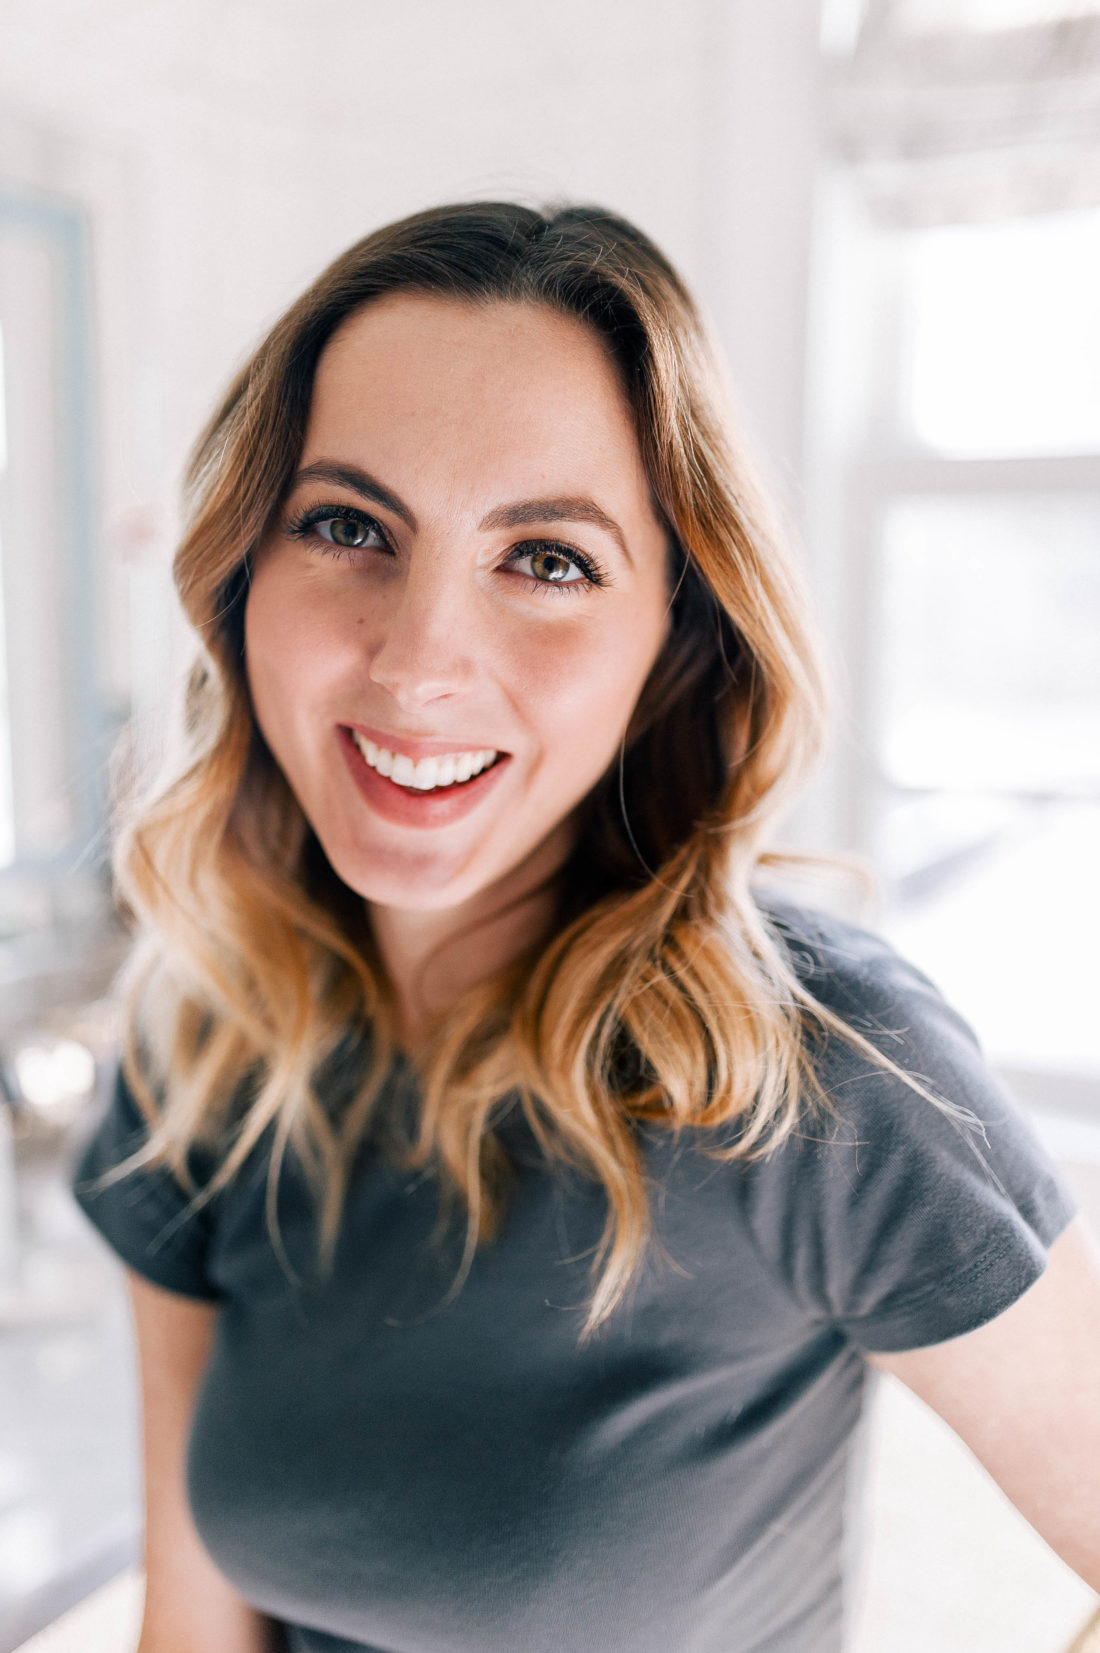 Eva Amurri Martino smiles in her glam room wearing a grey tshirt, as she shows the final progression of how she grew in her eyebrows and grooms them to achieve her best look